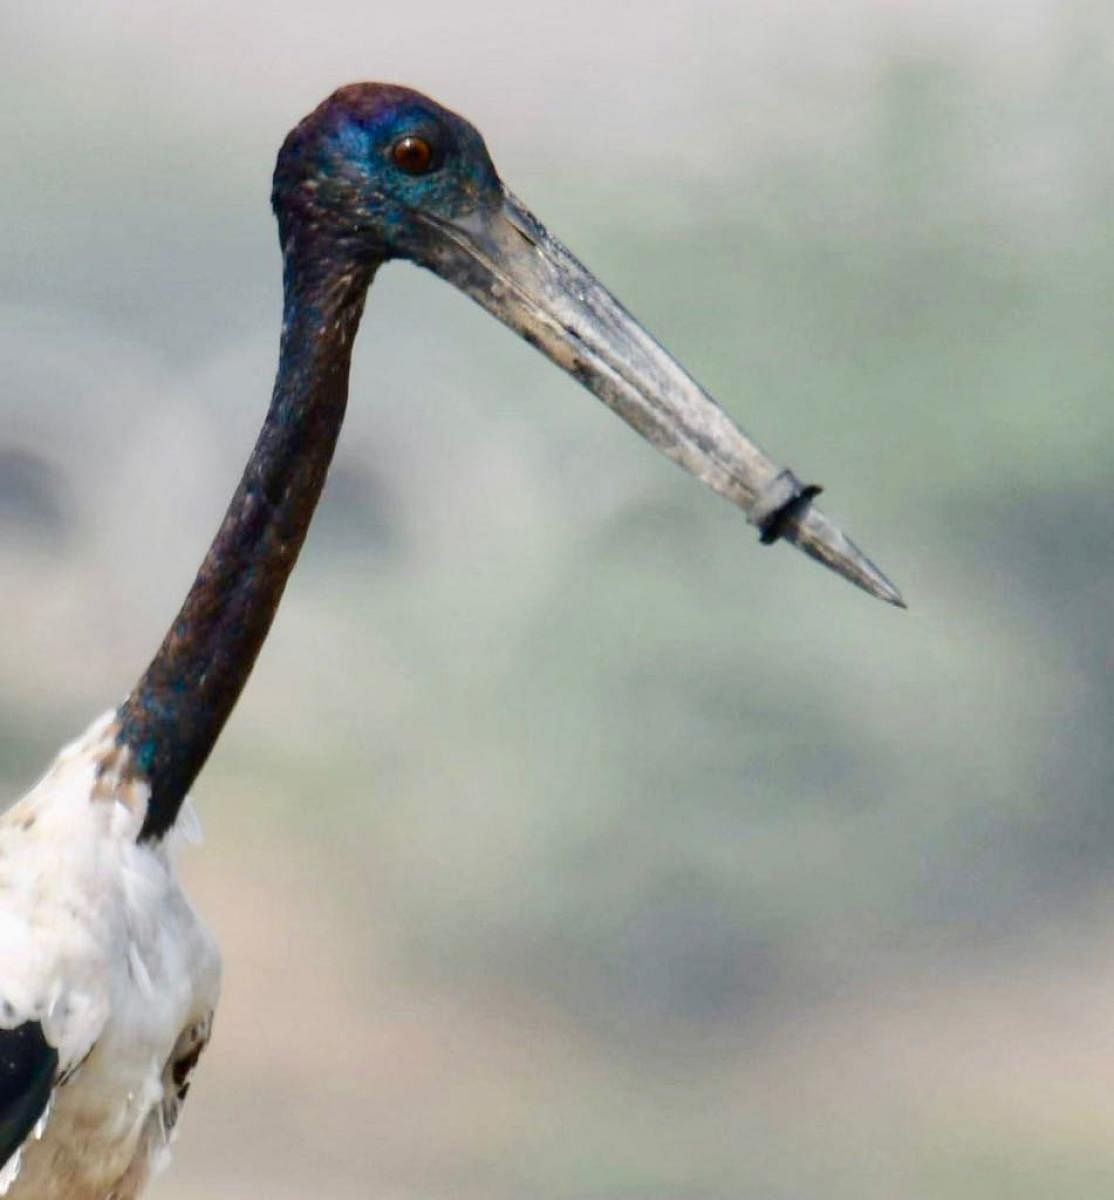 The black-necked stork stares at death if the plastic ring around its beak is not removed soon manually by rescuers.